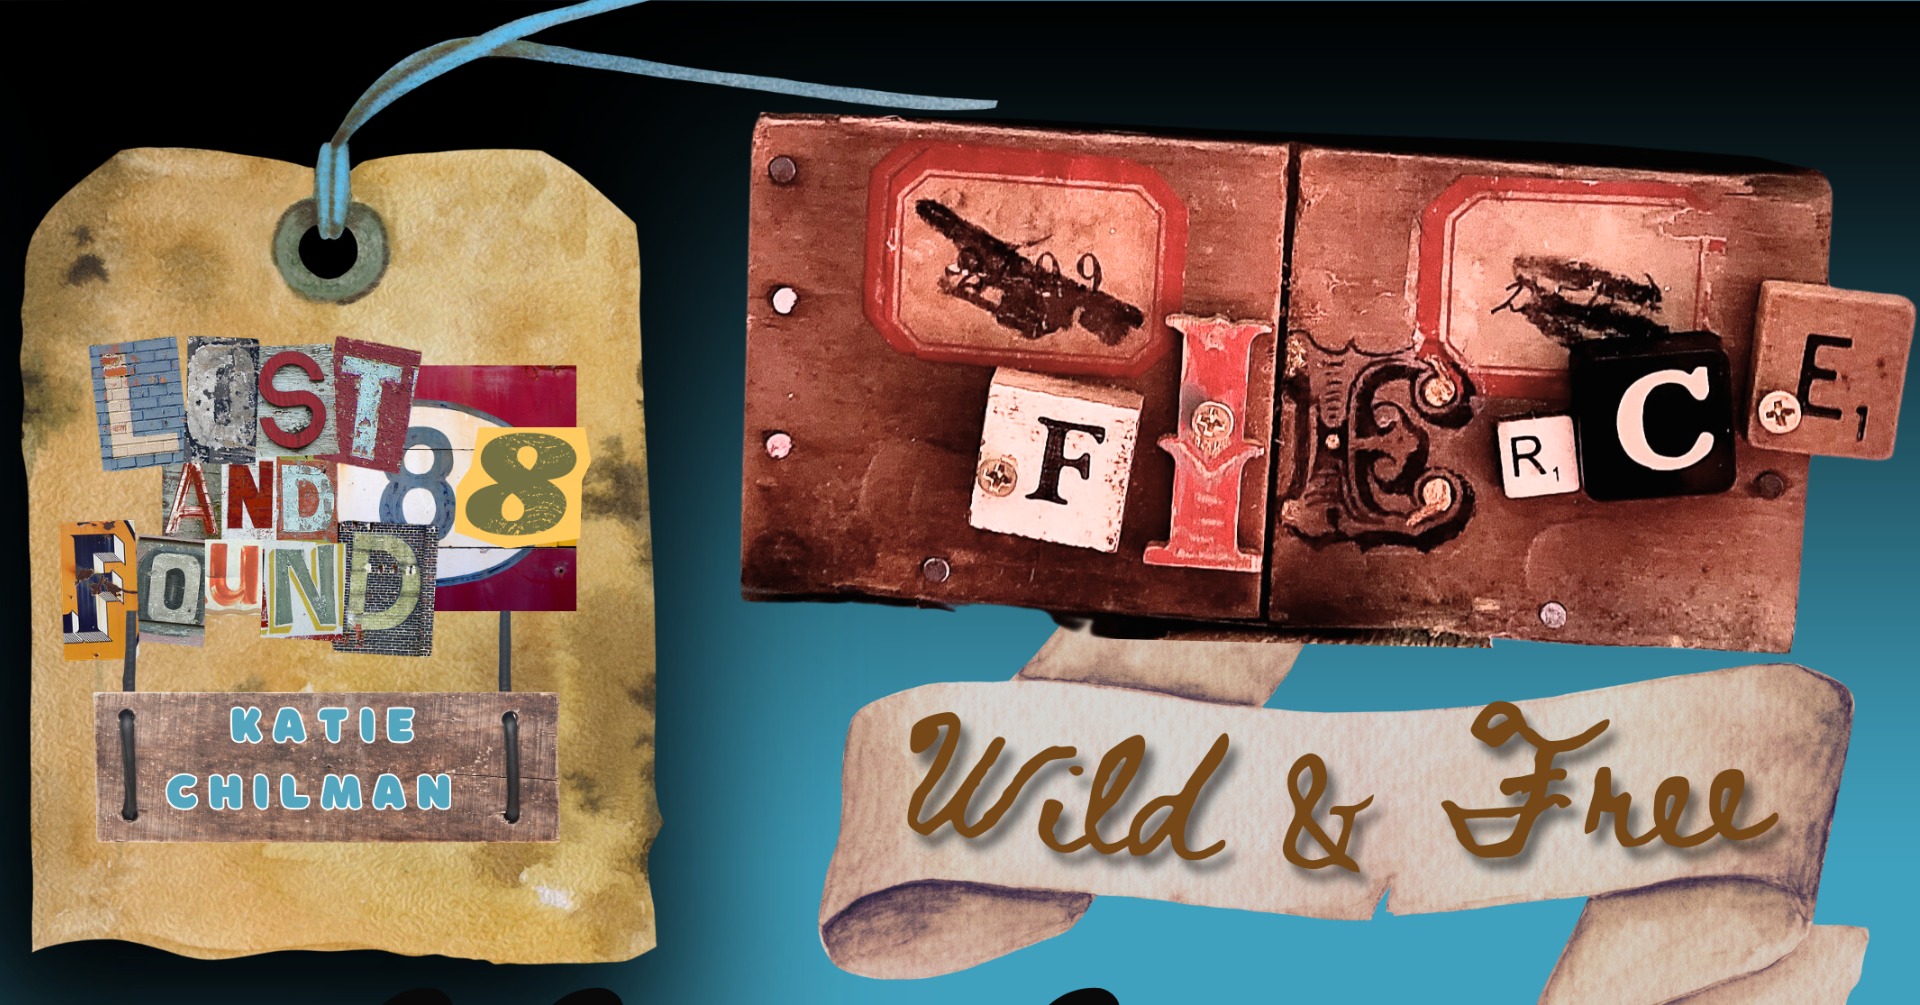 "Fierce, Wild, and Free," an art exhibition by Katie Chilman at Ellipsis Studio at Cross Grand in Dutchtown, St. Louis, MO. The image is a collage of found typography and objects, a reference to Chilman's work that includes vintage and found items.